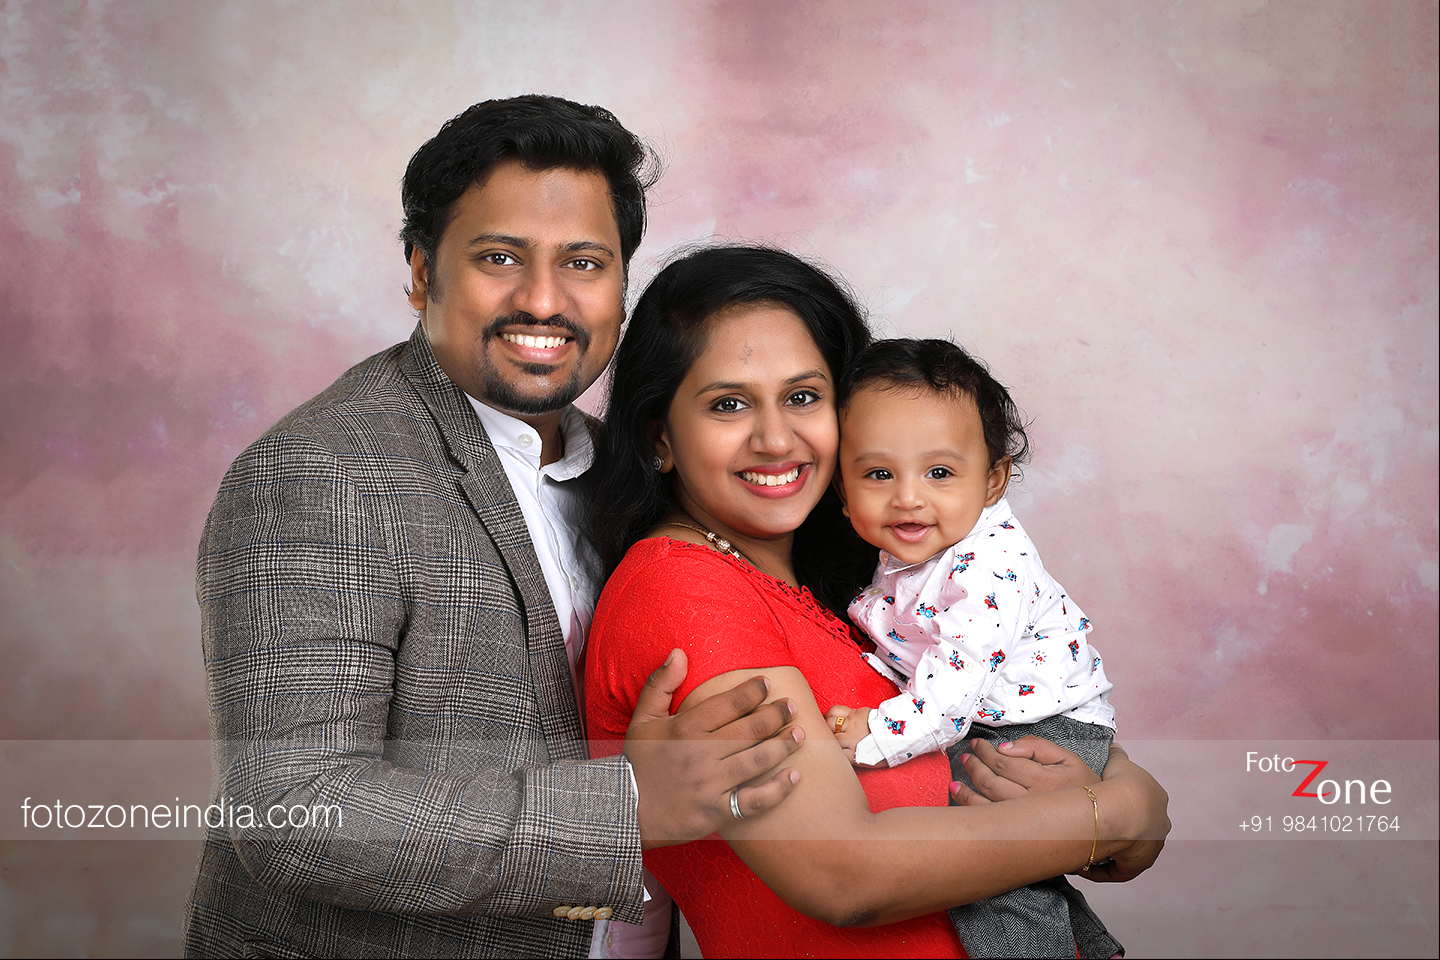 5 Fun Family Portrait Poses With Kids - Steven Cotton Photography